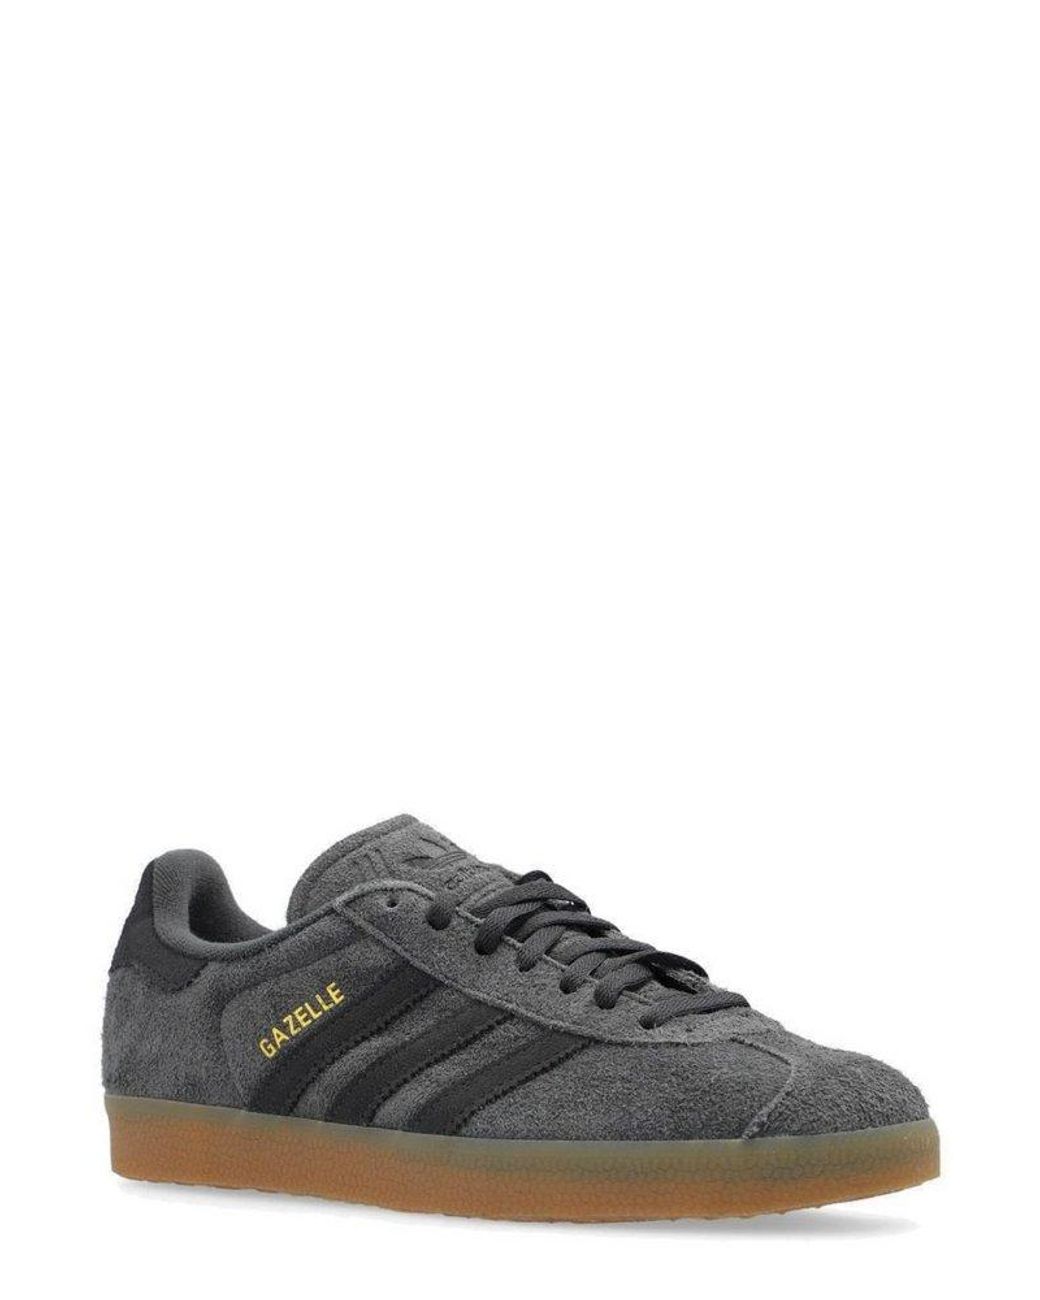 adidas Originals Gazelle Lace-up Sneakers in Black | Lyst